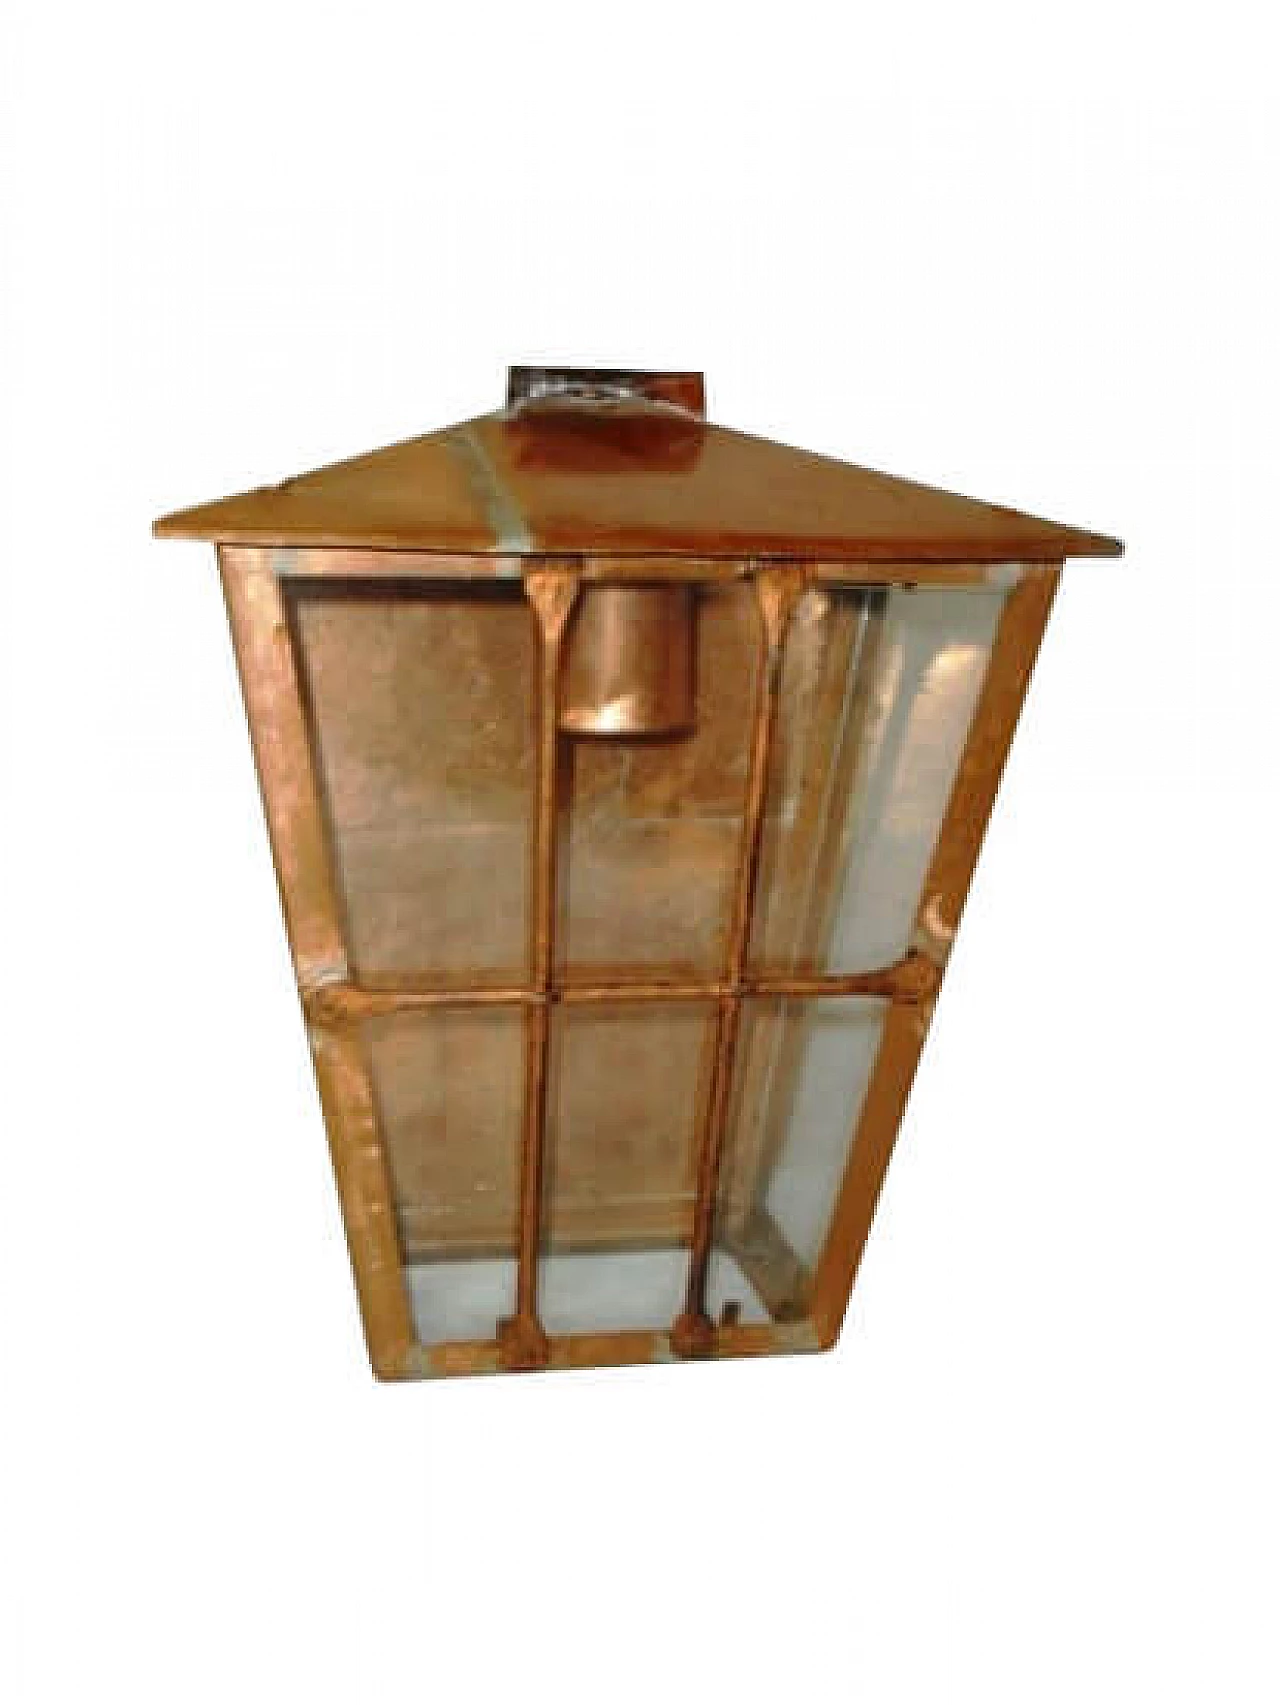 English style copper lamp with grating, 20th century 1166595